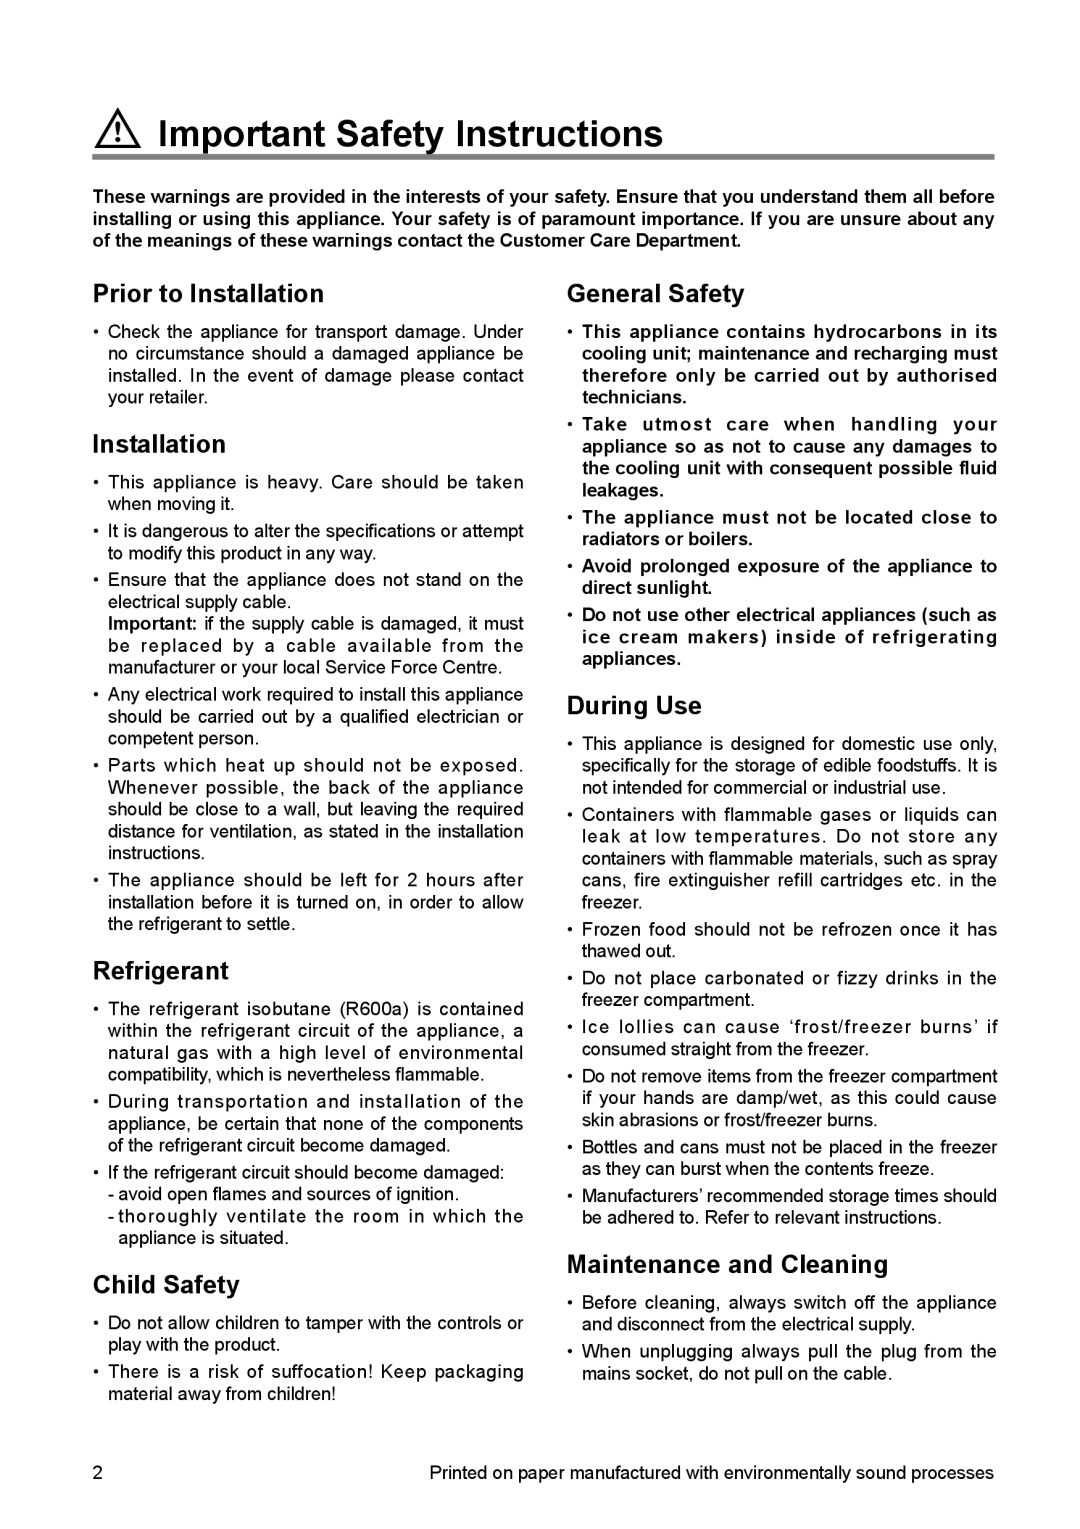 Zanussi ZI 9121 FA manual Important Safety Instructions, Prior to Installation, Refrigerant, General Safety, During Use 